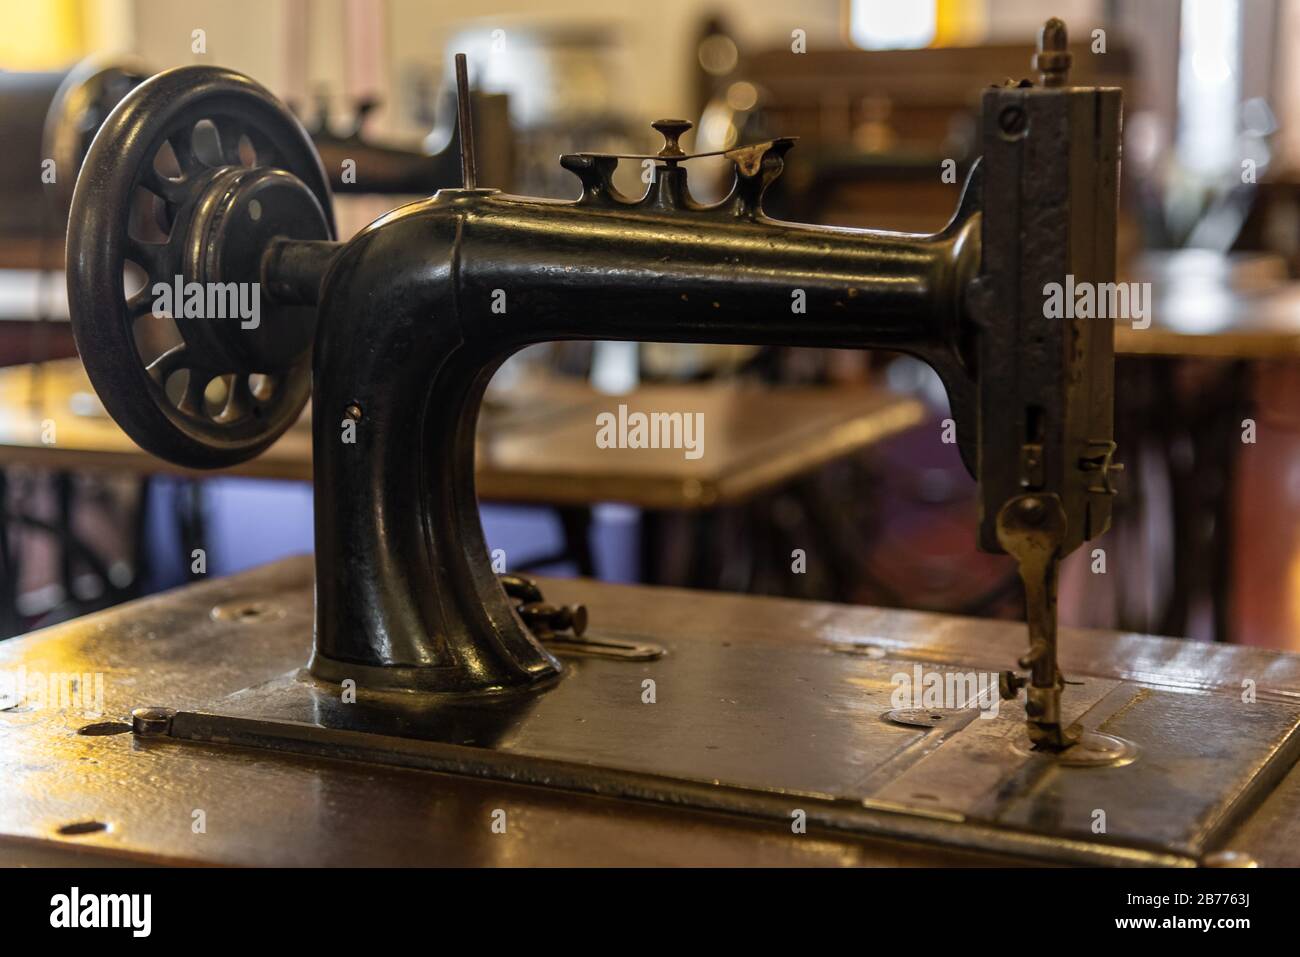 Classic sewing machine with a blurred background Stock Photo